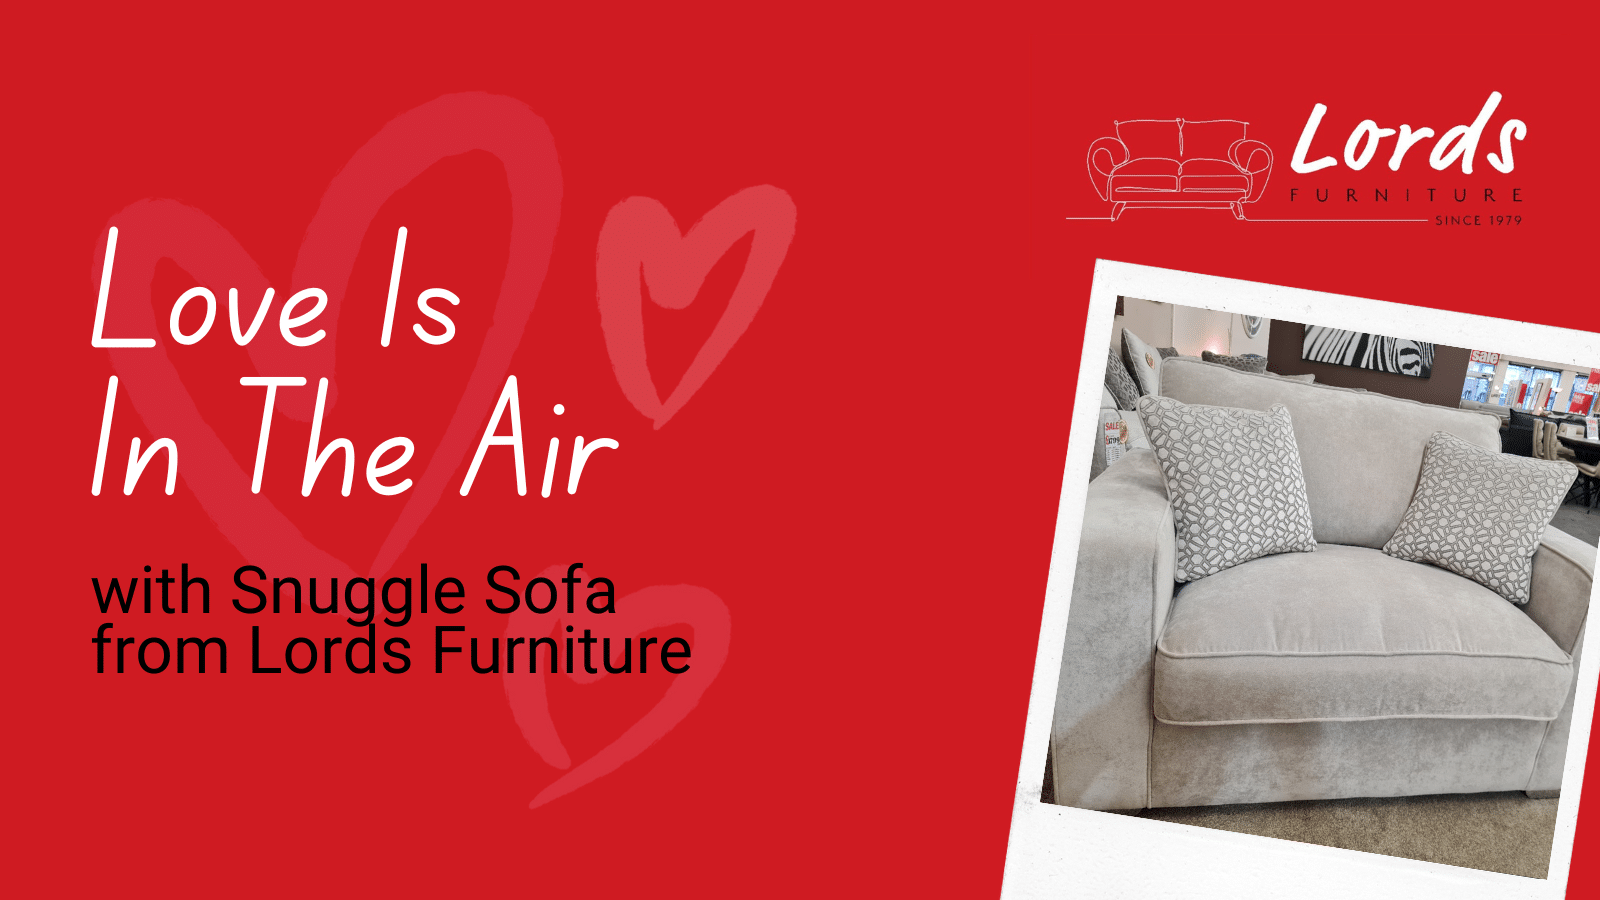 Love Is In The Air with Snuggle Sofa from Lords Furniture